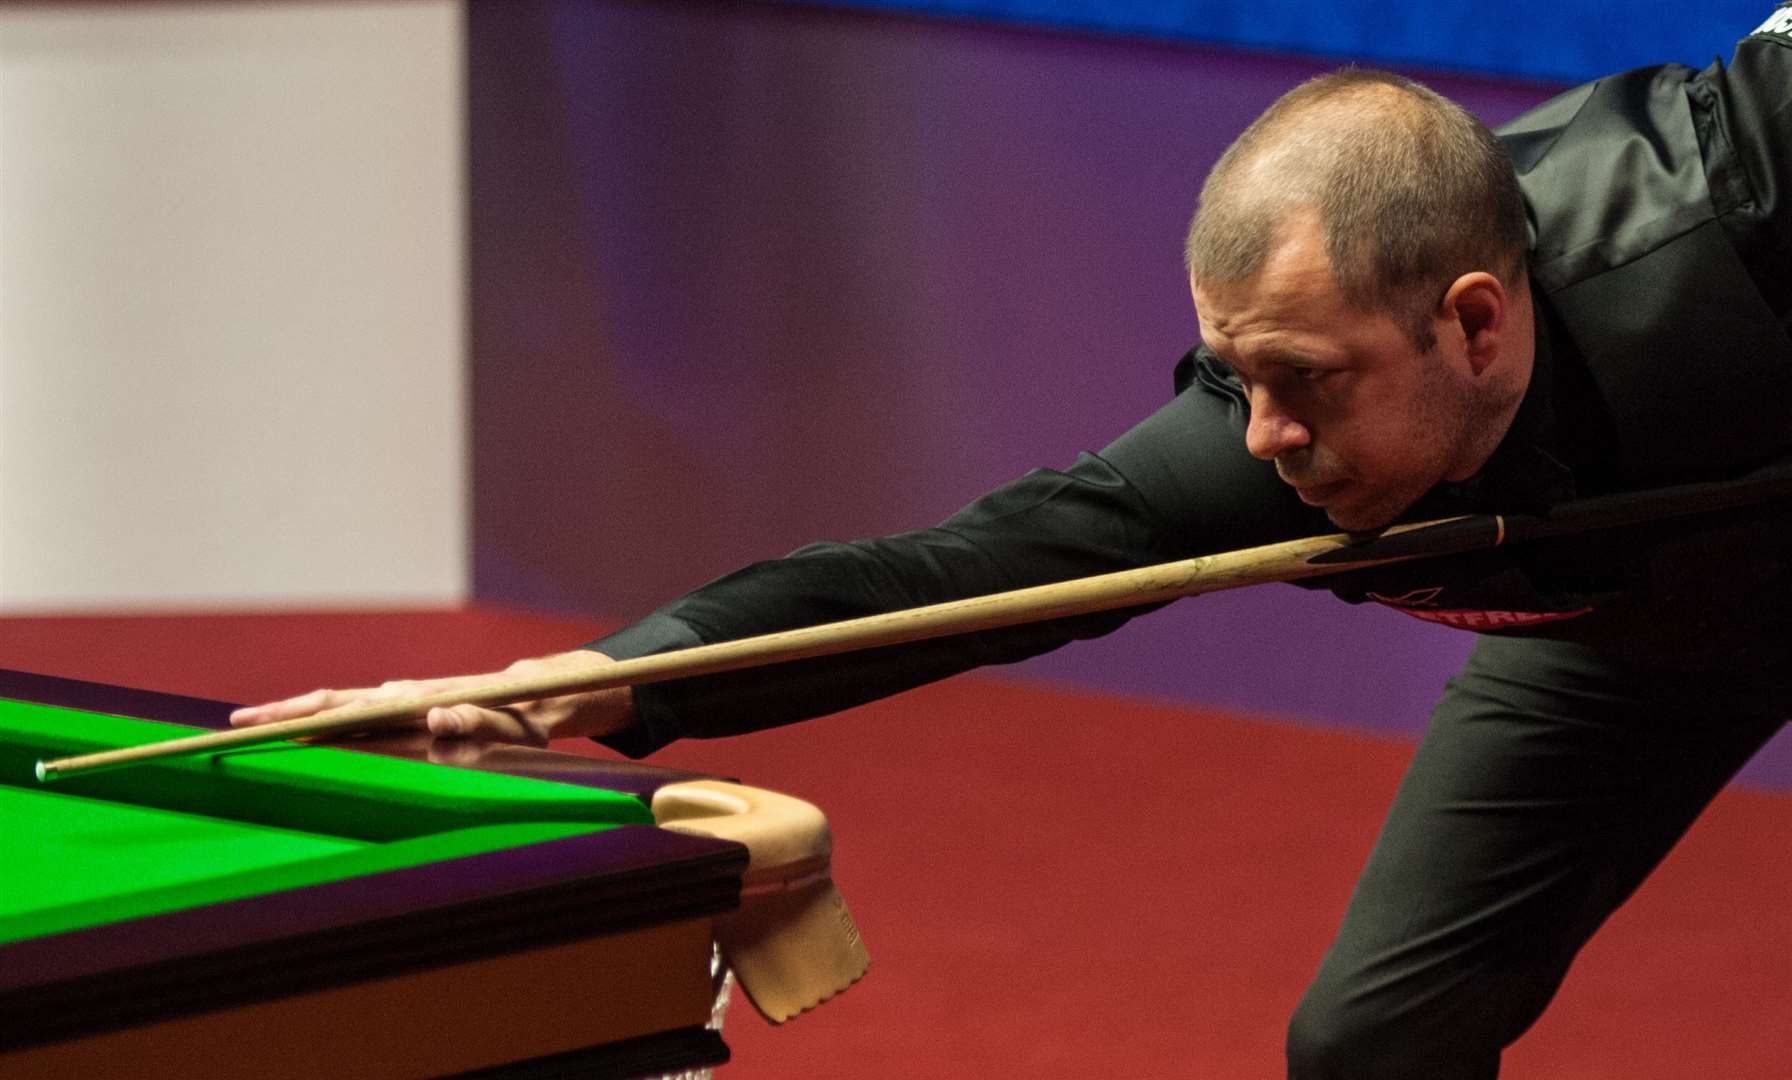 Barry Hawkins beats world number one Judd Trump to earn semi-final place against Ronnie OSullivan in the Tour Championship